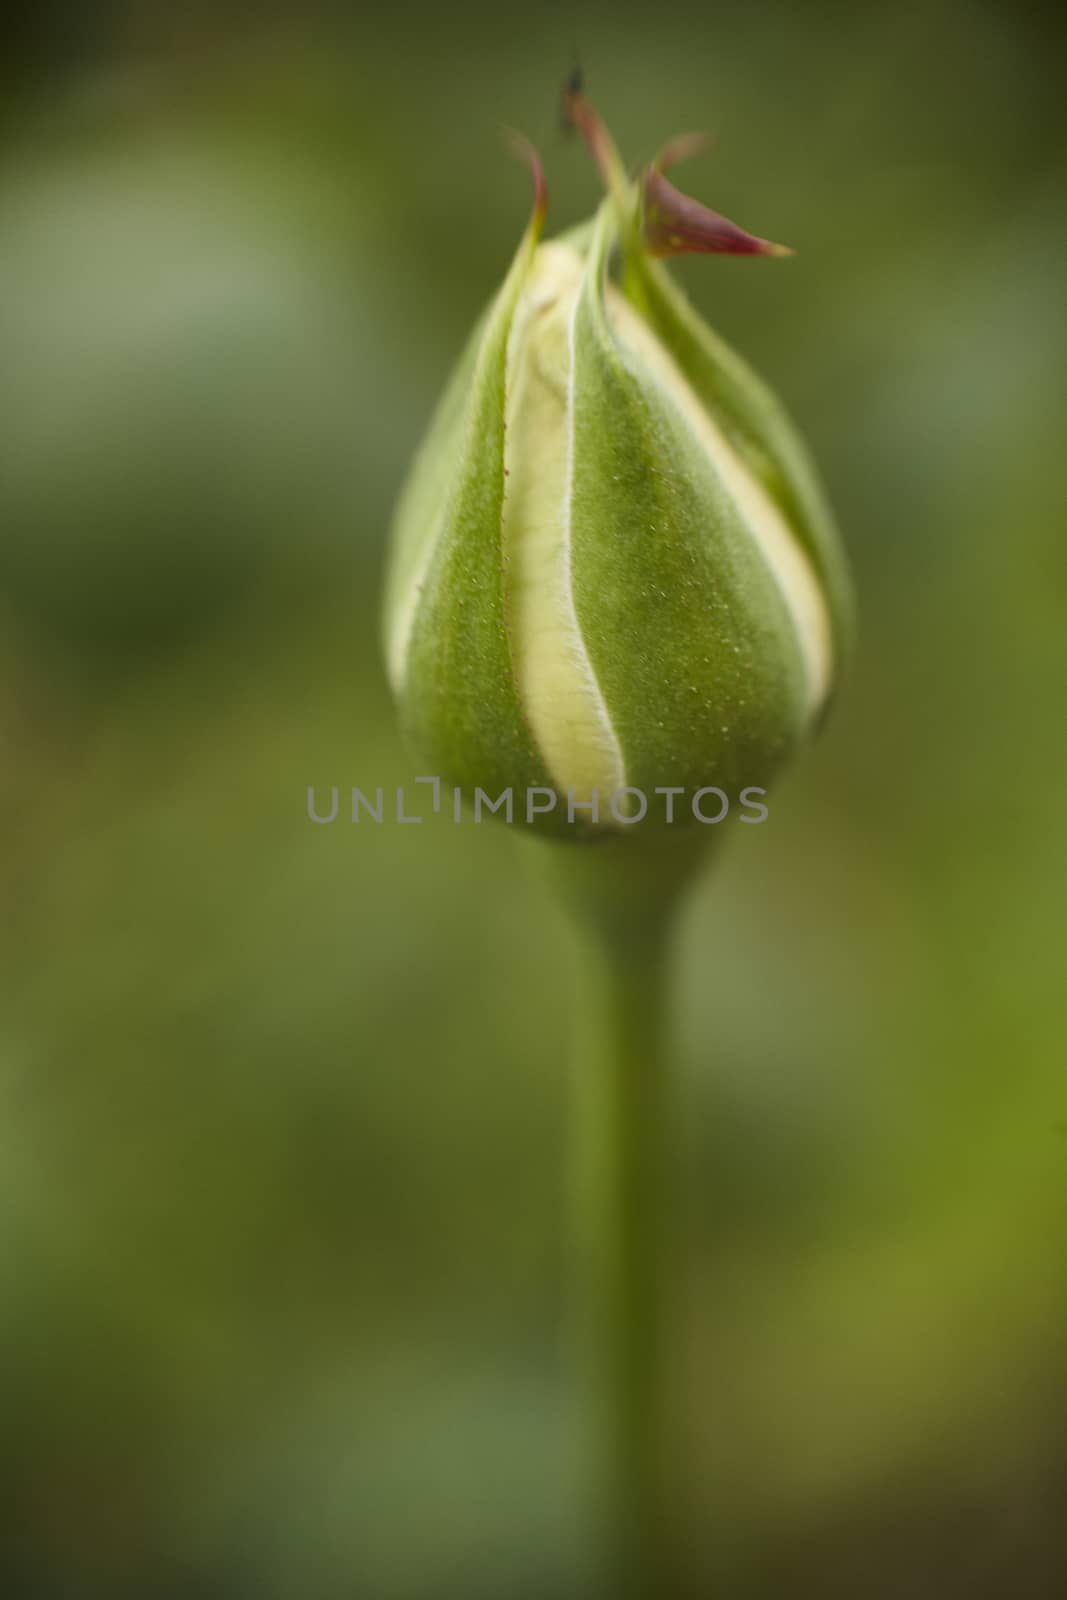 Bud of a rose by pippocarlot